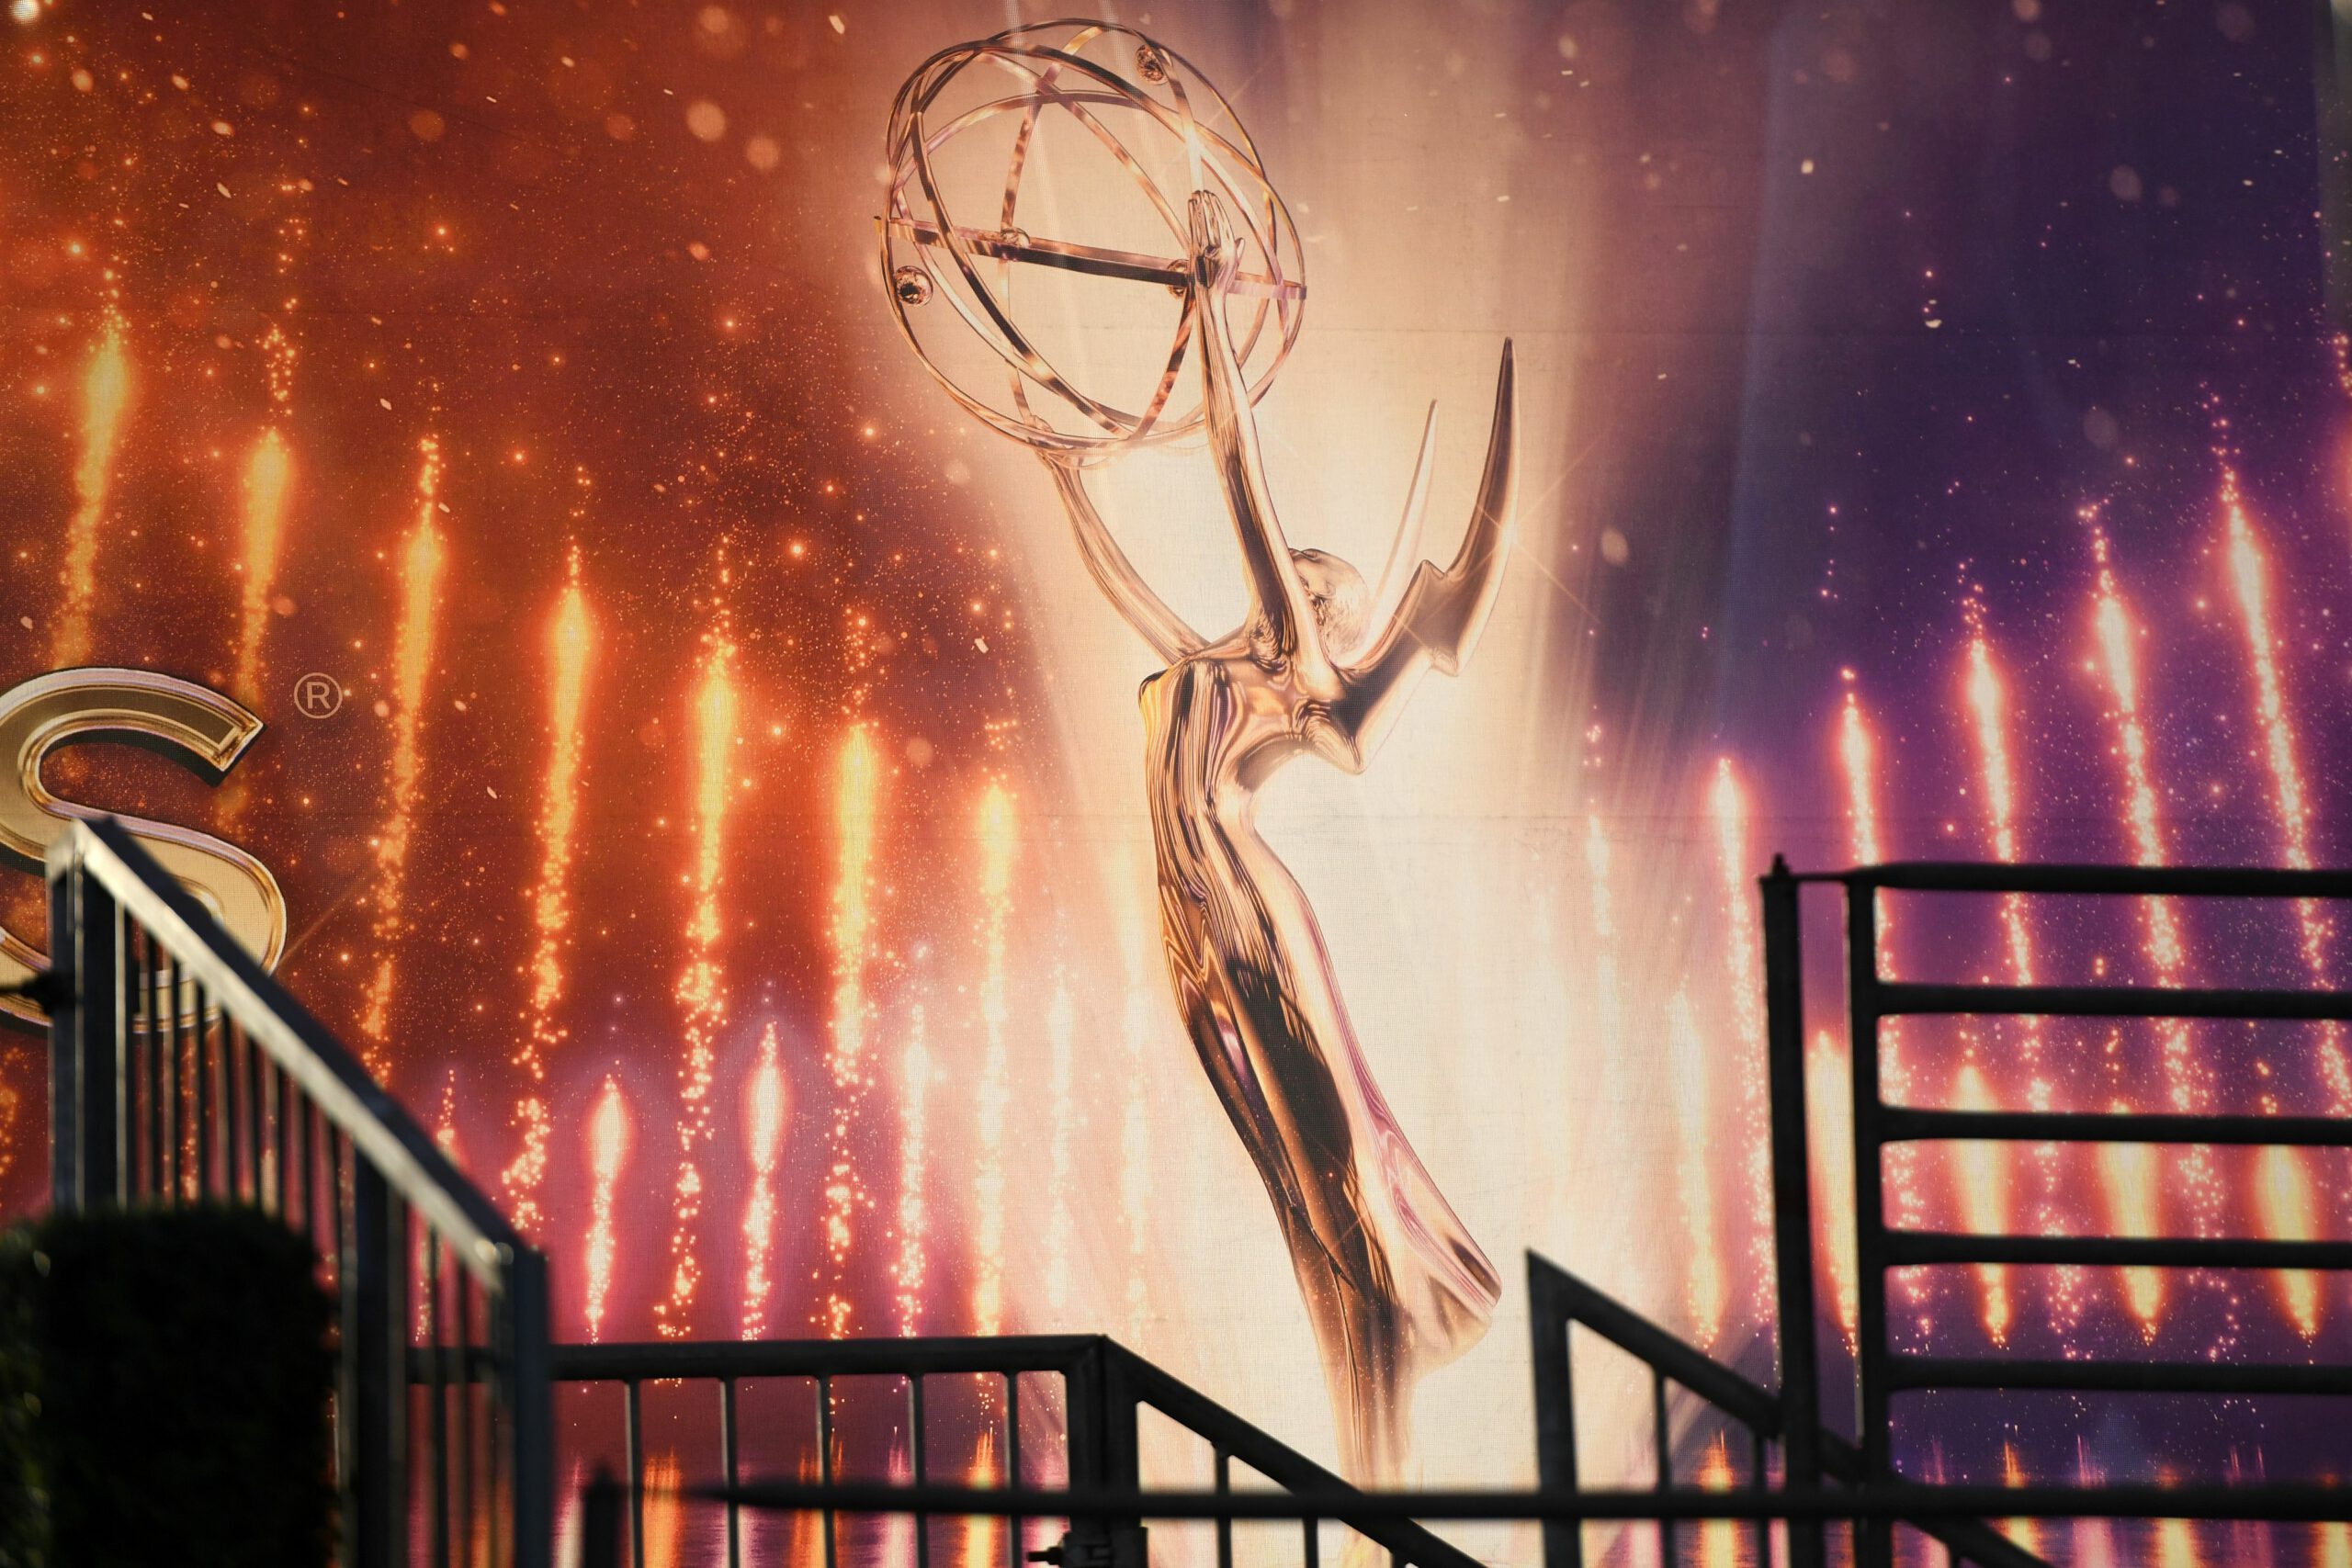 a giant Emmys statue as part of the set design at an Emmys broadcast